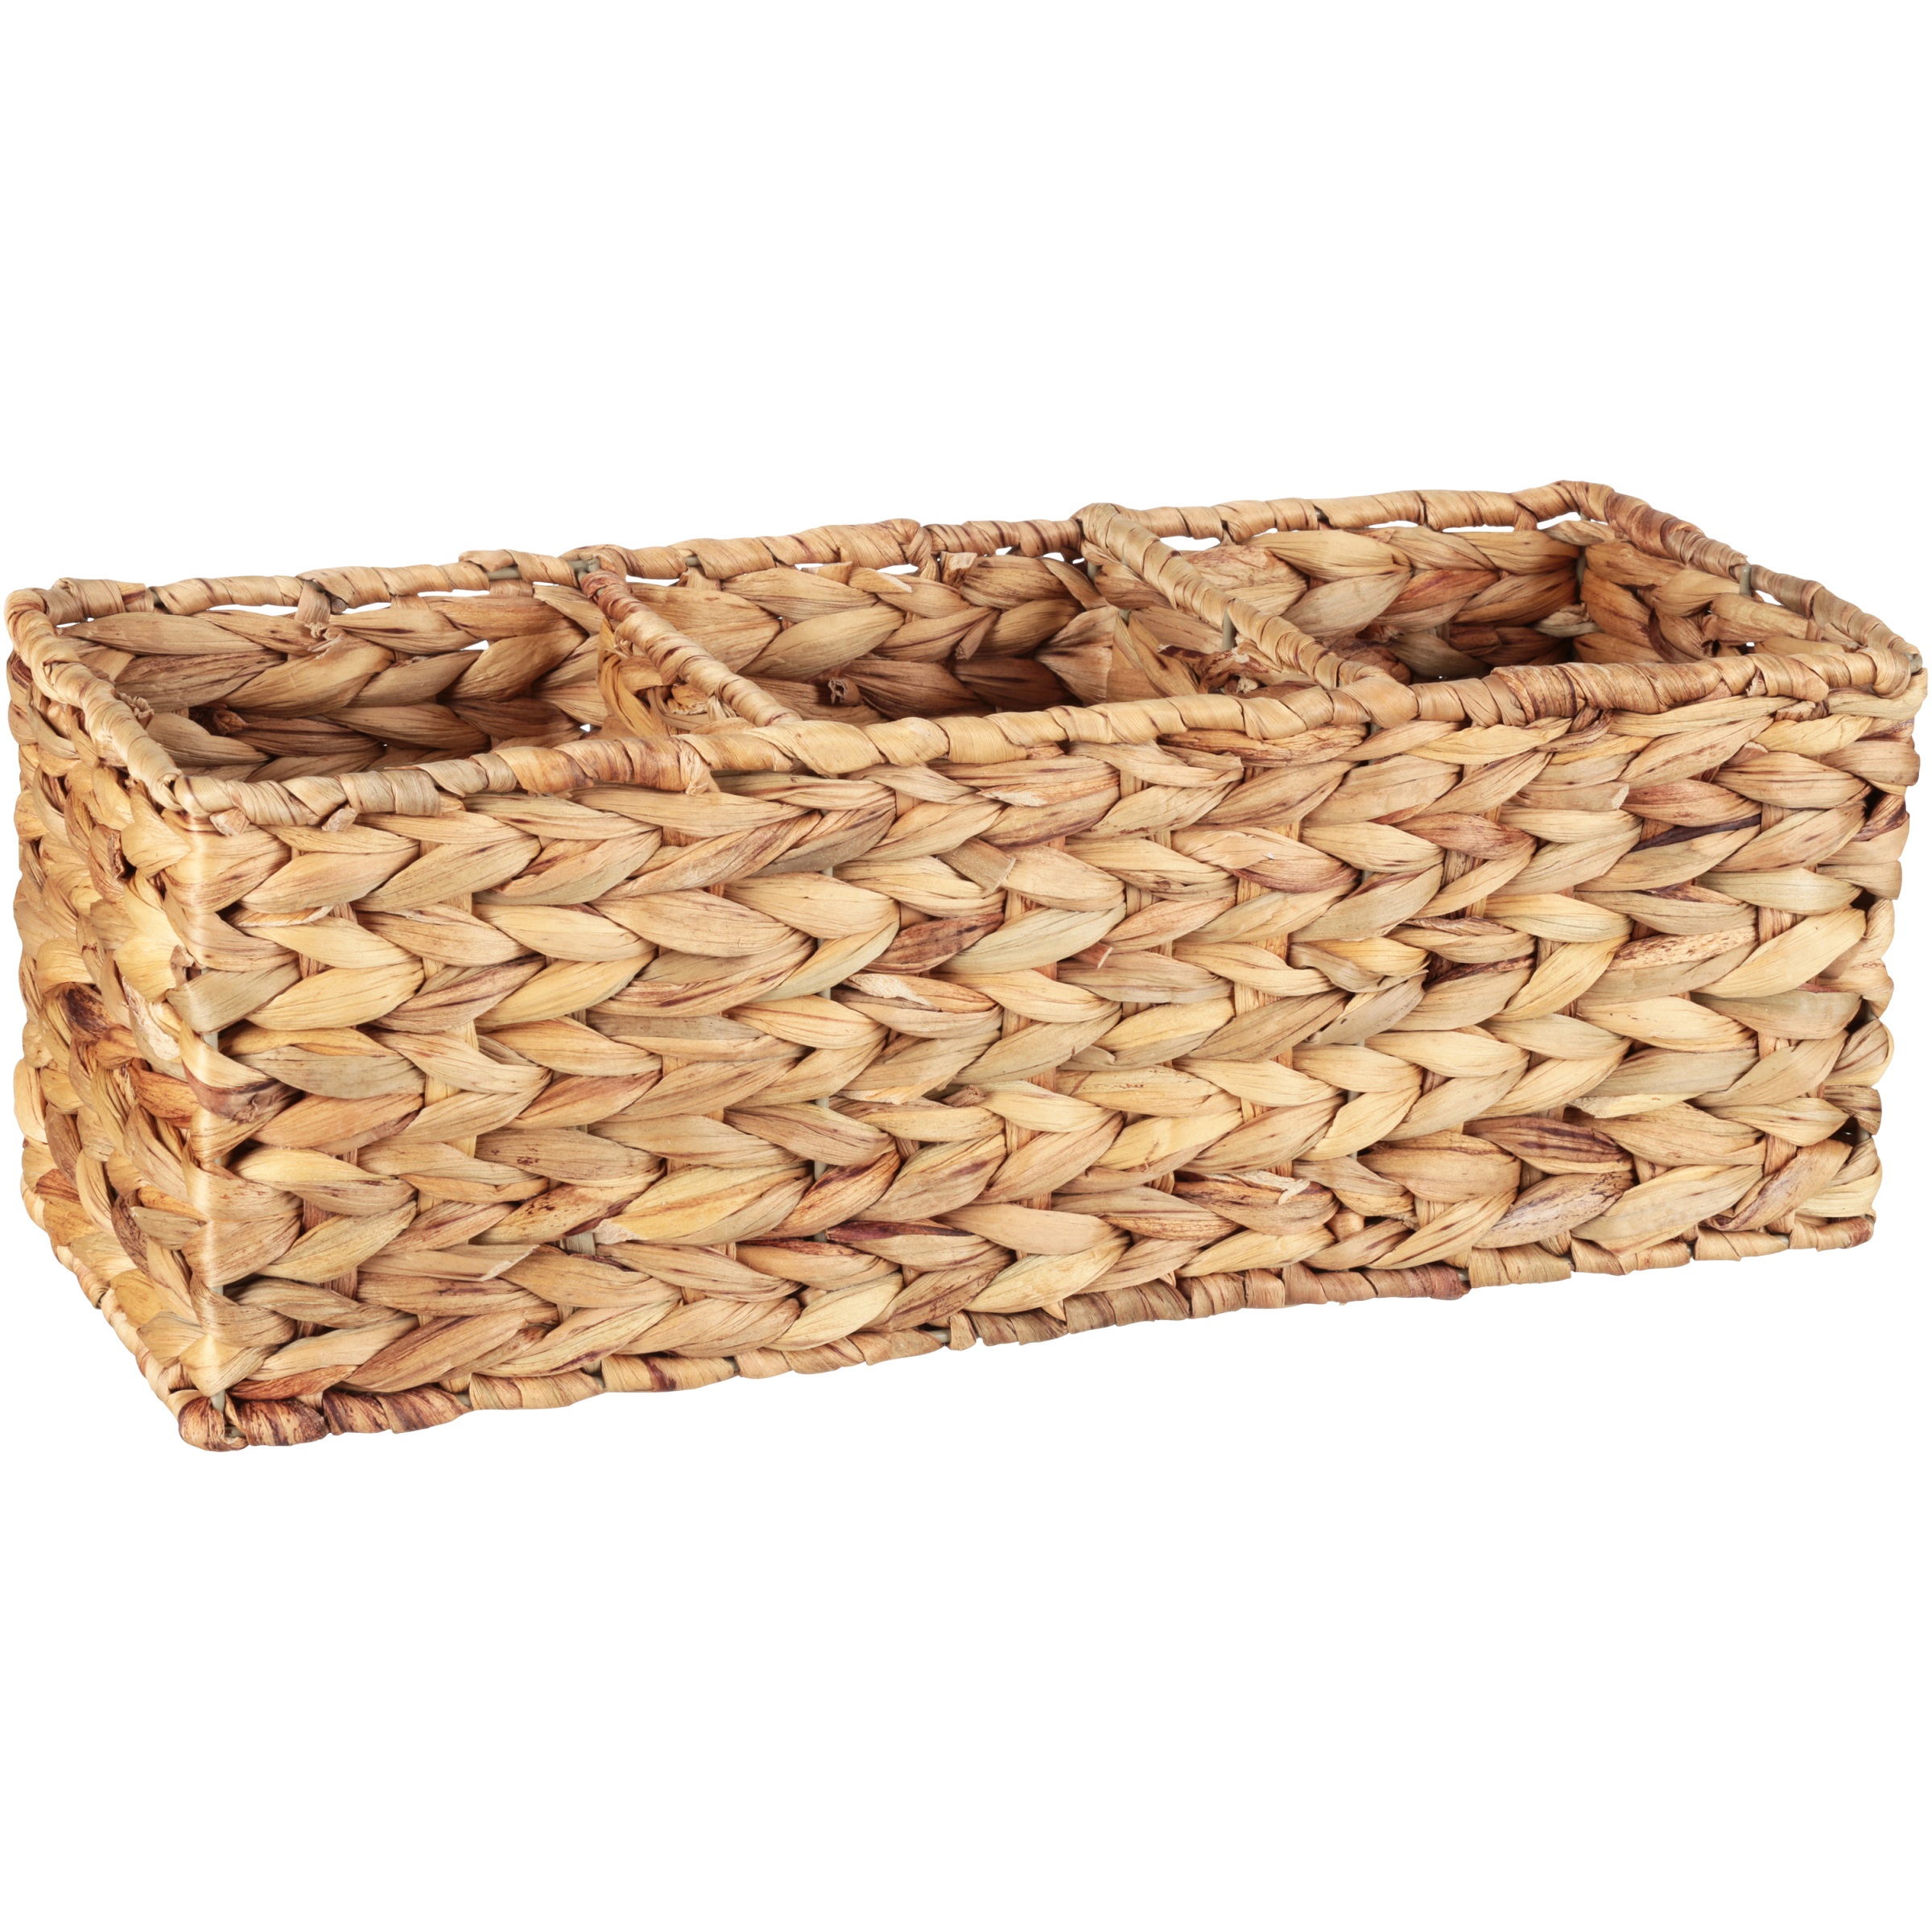 Better Homes & Gardens Woven Water Hyacinth Tank Basket, Natural, Size: 6.69 inch x 16.14 inch